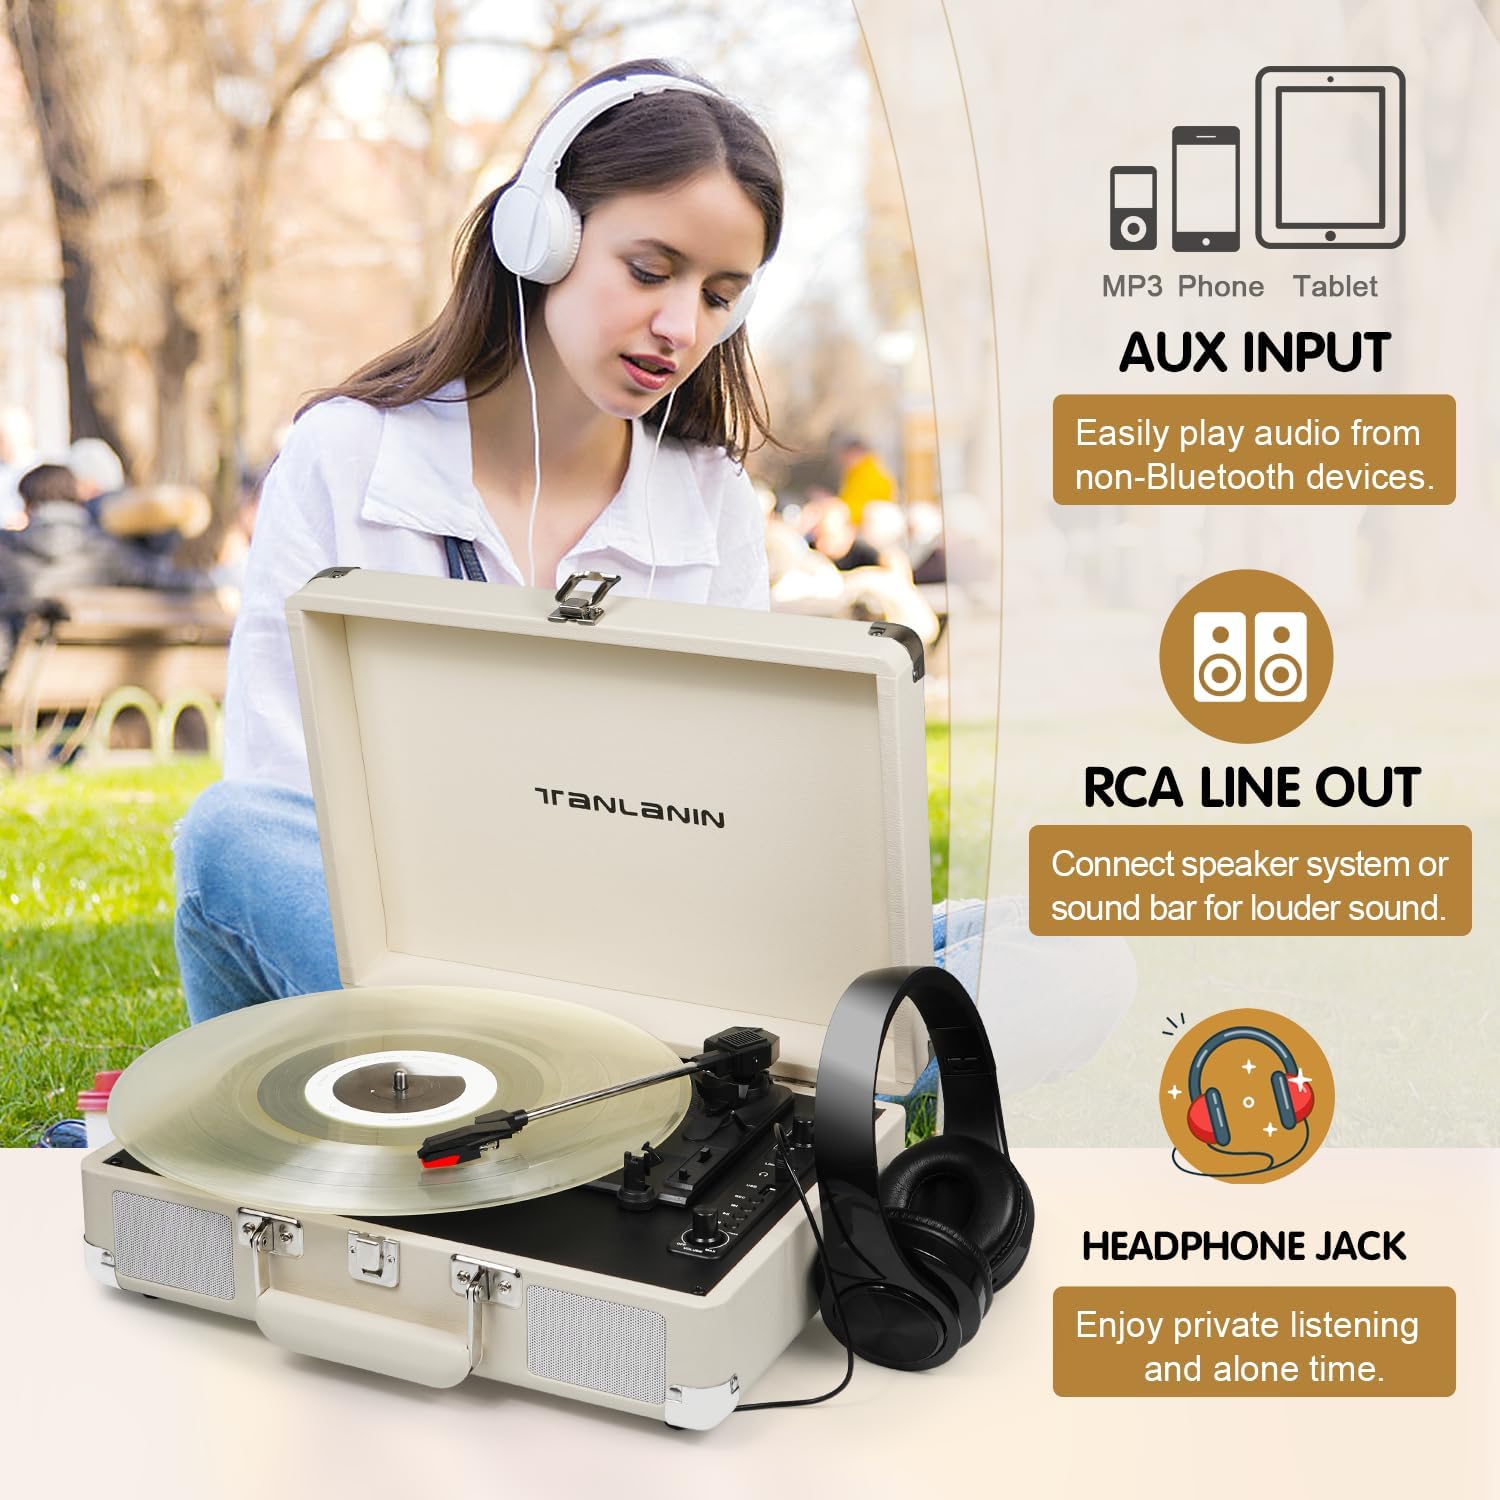 Vinyl Record Player Vintage Portable Suitcase Turntables with Built-in Upgrade Speakers, USB Recording, 33 45 78RPM Bluetooth LP Player Support AUX in RCA Line Out Headphone Jack, Cream White